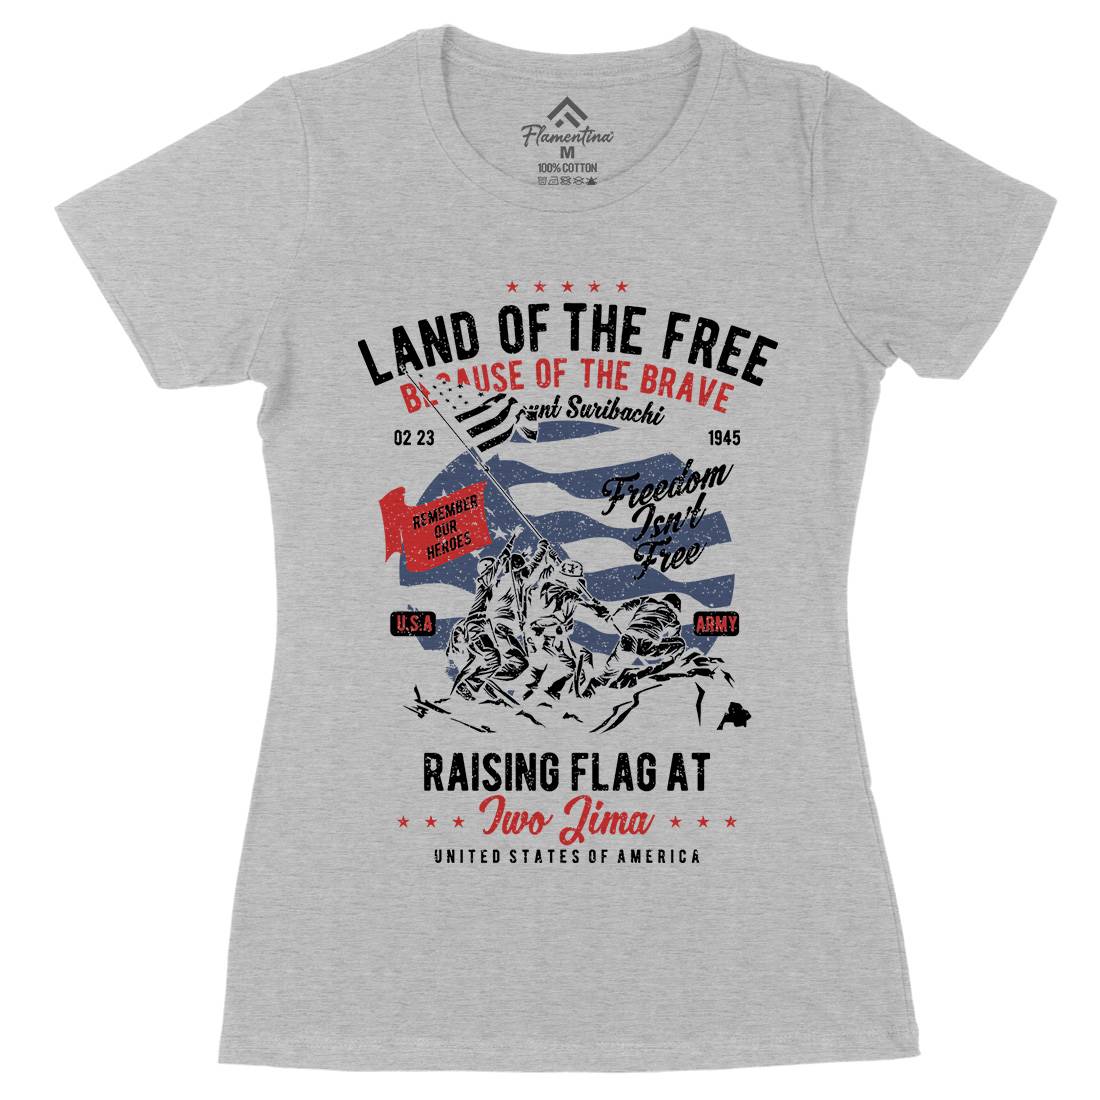 Land Of The Free Womens Organic Crew Neck T-Shirt Army A702